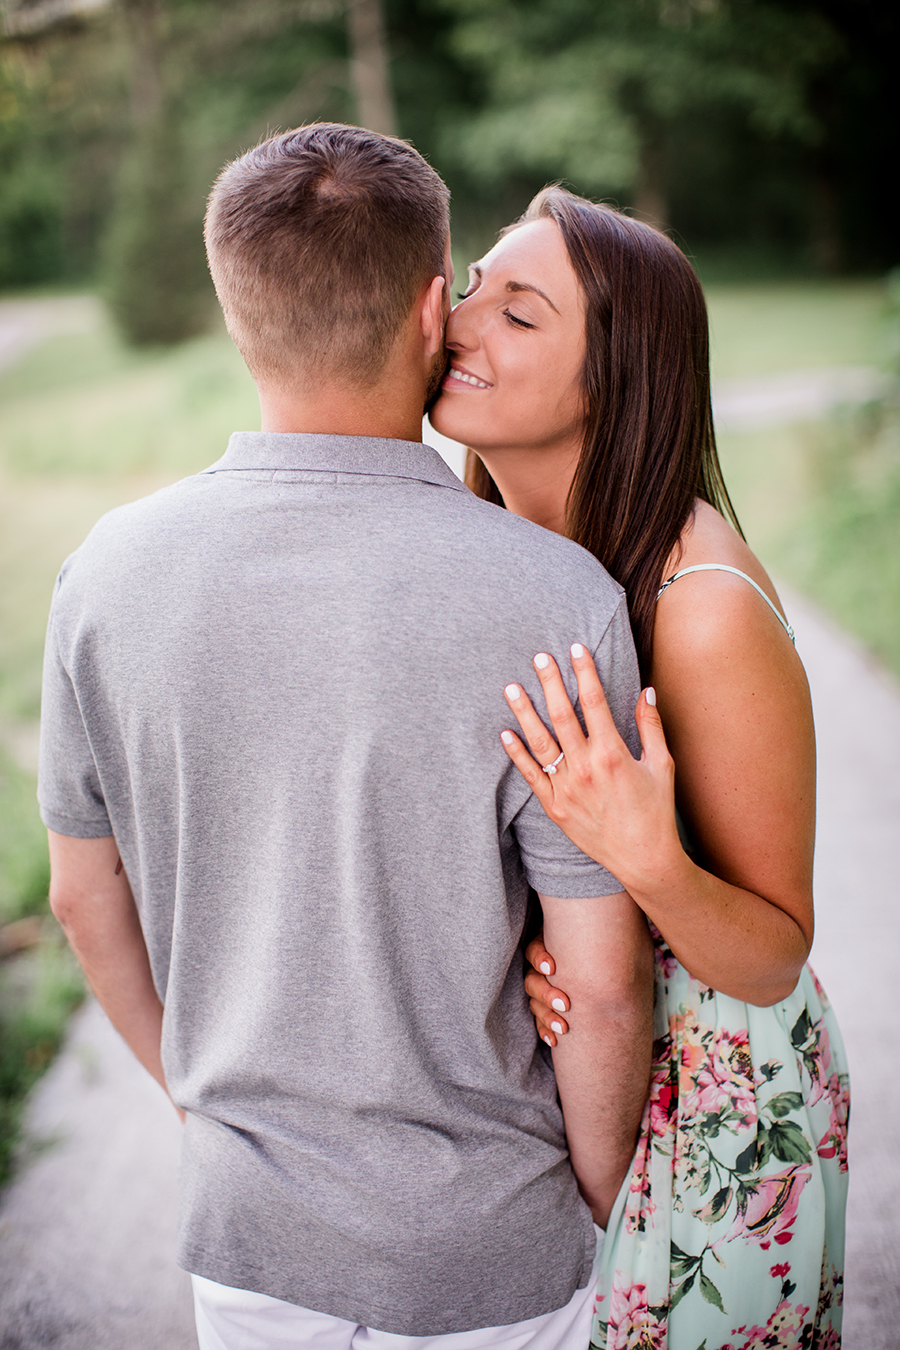 Kissing cheek at this Estate of Grace engagement session by Knoxville Wedding Photographer, Amanda May Photos.